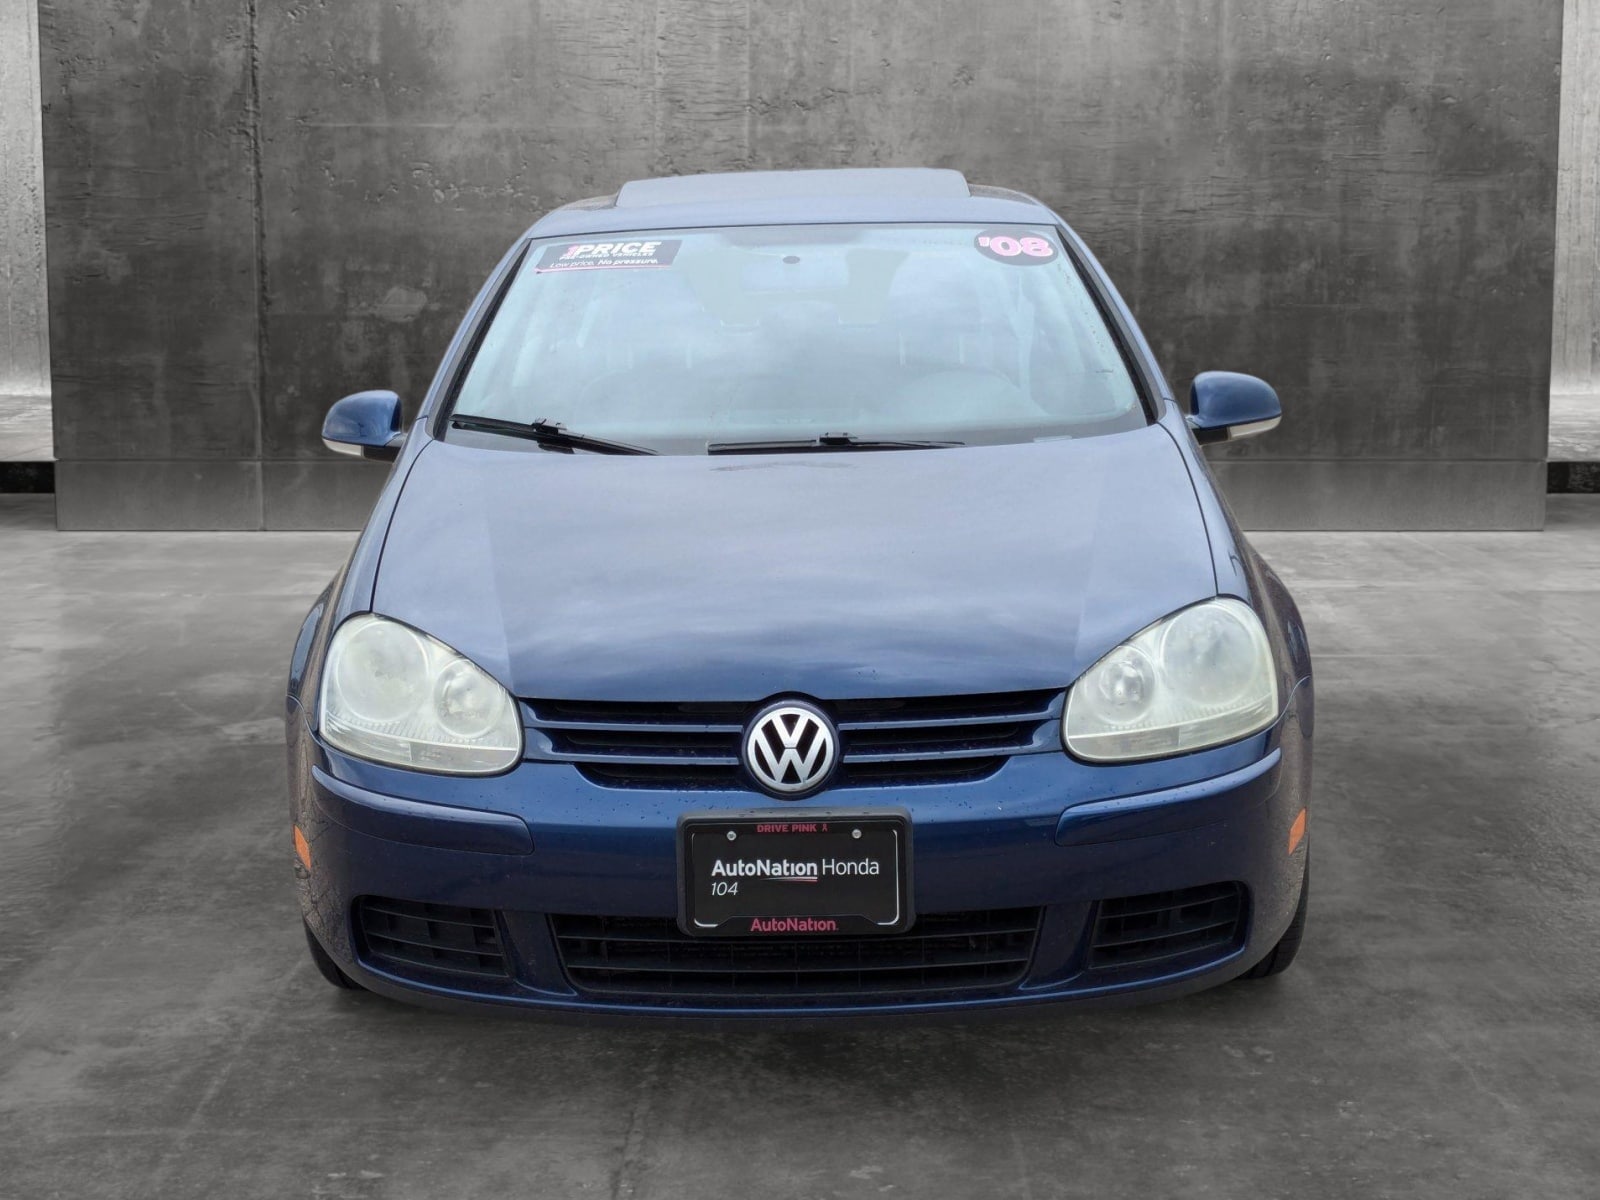 Used 2008 Volkswagen Rabbit S with VIN WVWCA71K18W064060 for sale in Westminster, CO